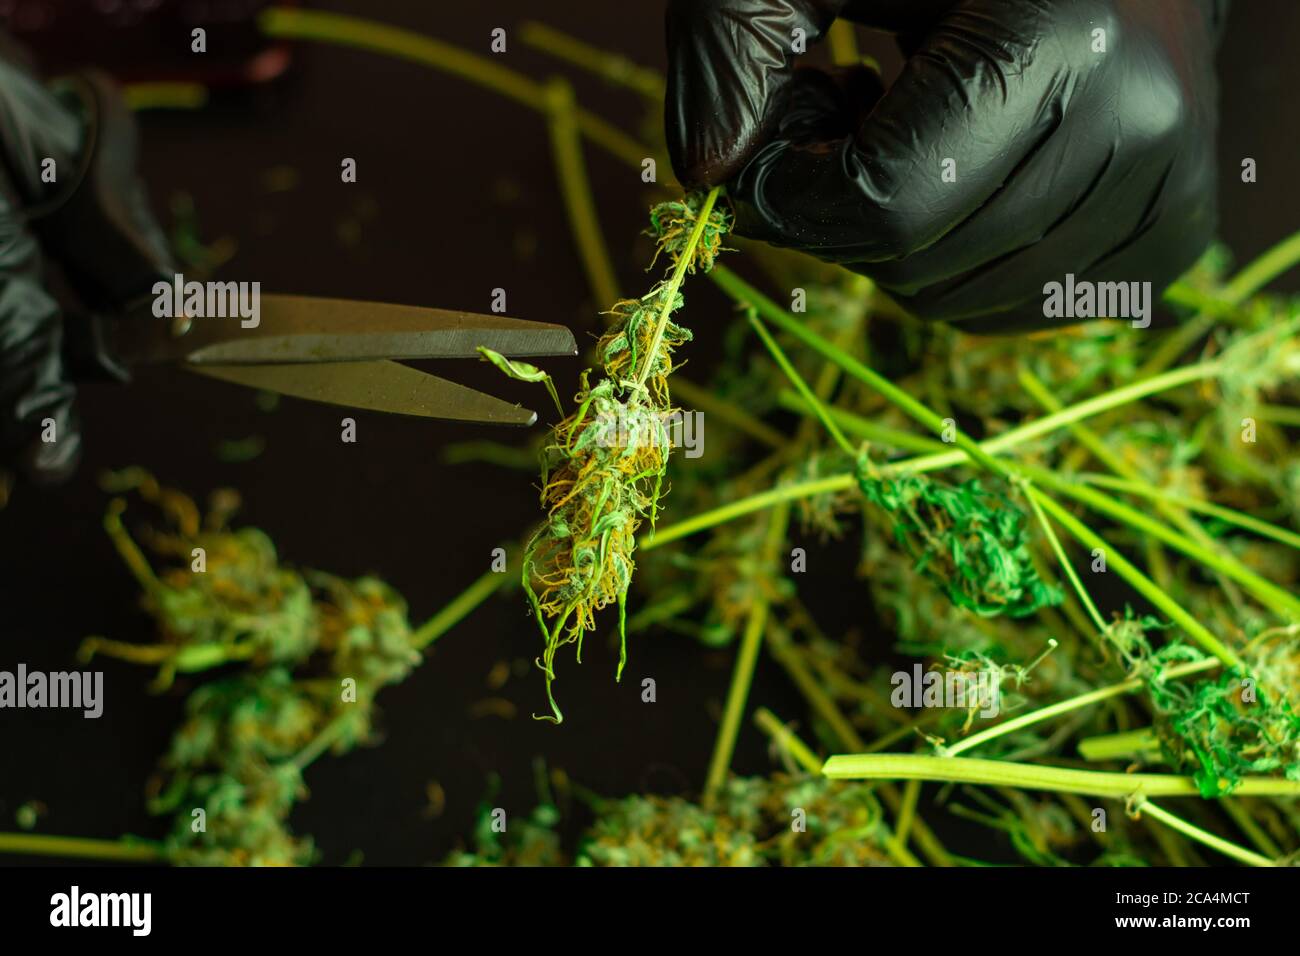 Cannabis processing for commercial use. Prune and trimming of marijuana plant. Man in black gloves using scissors. THC drug medical use. Cannabis buds Stock Photo